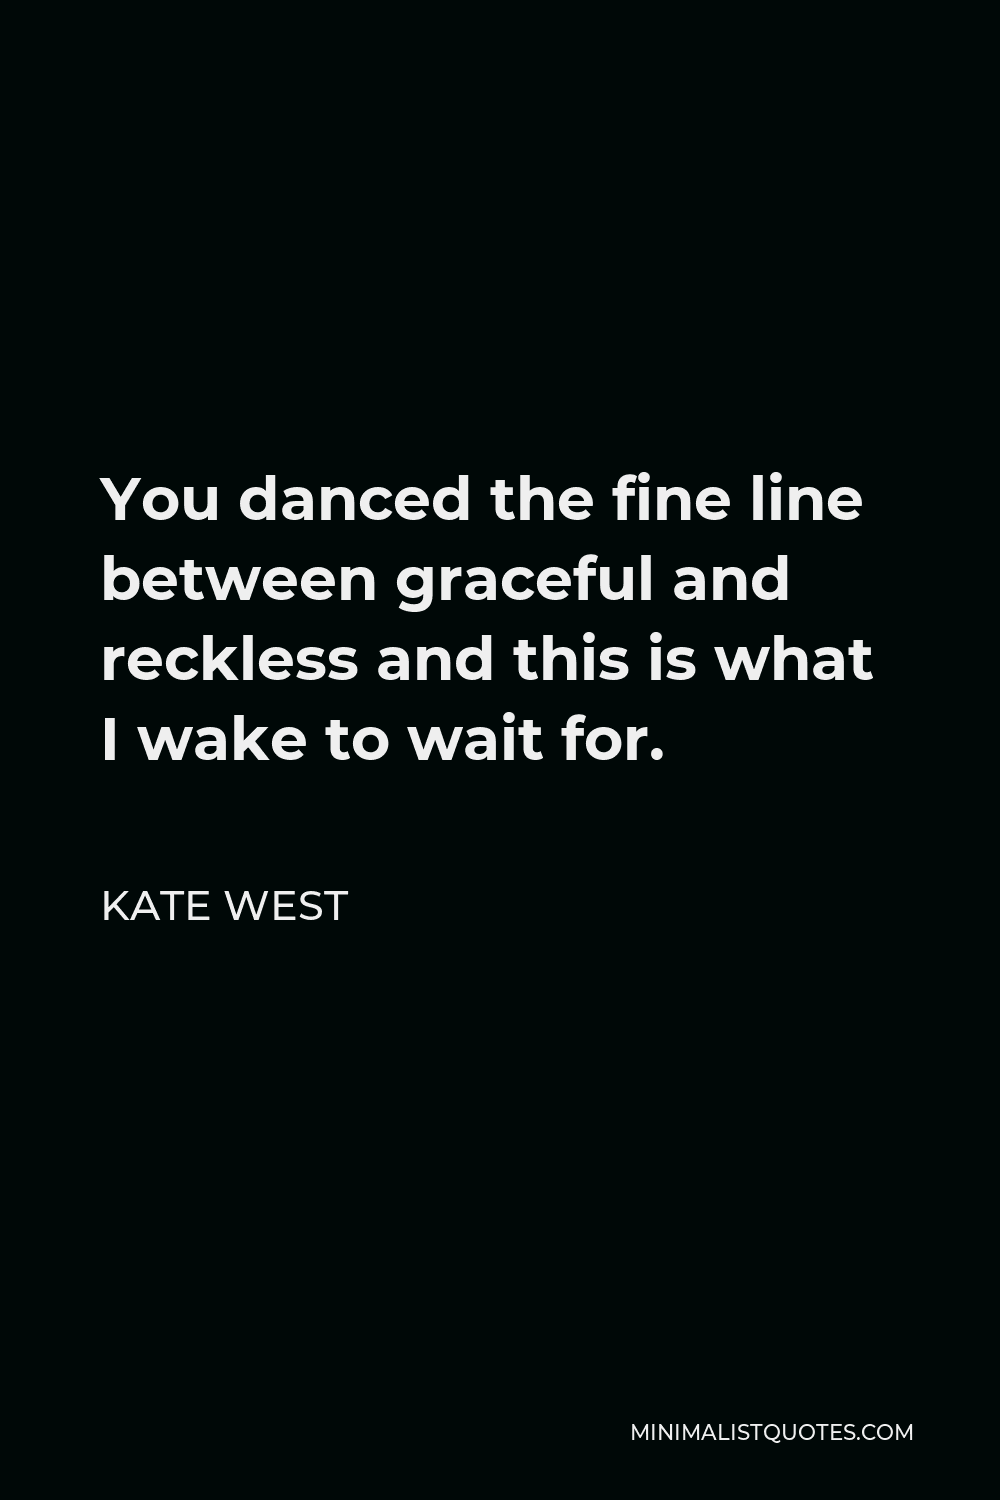 Kate West Quote - You danced the fine line between graceful and reckless and this is what I wake to wait for.